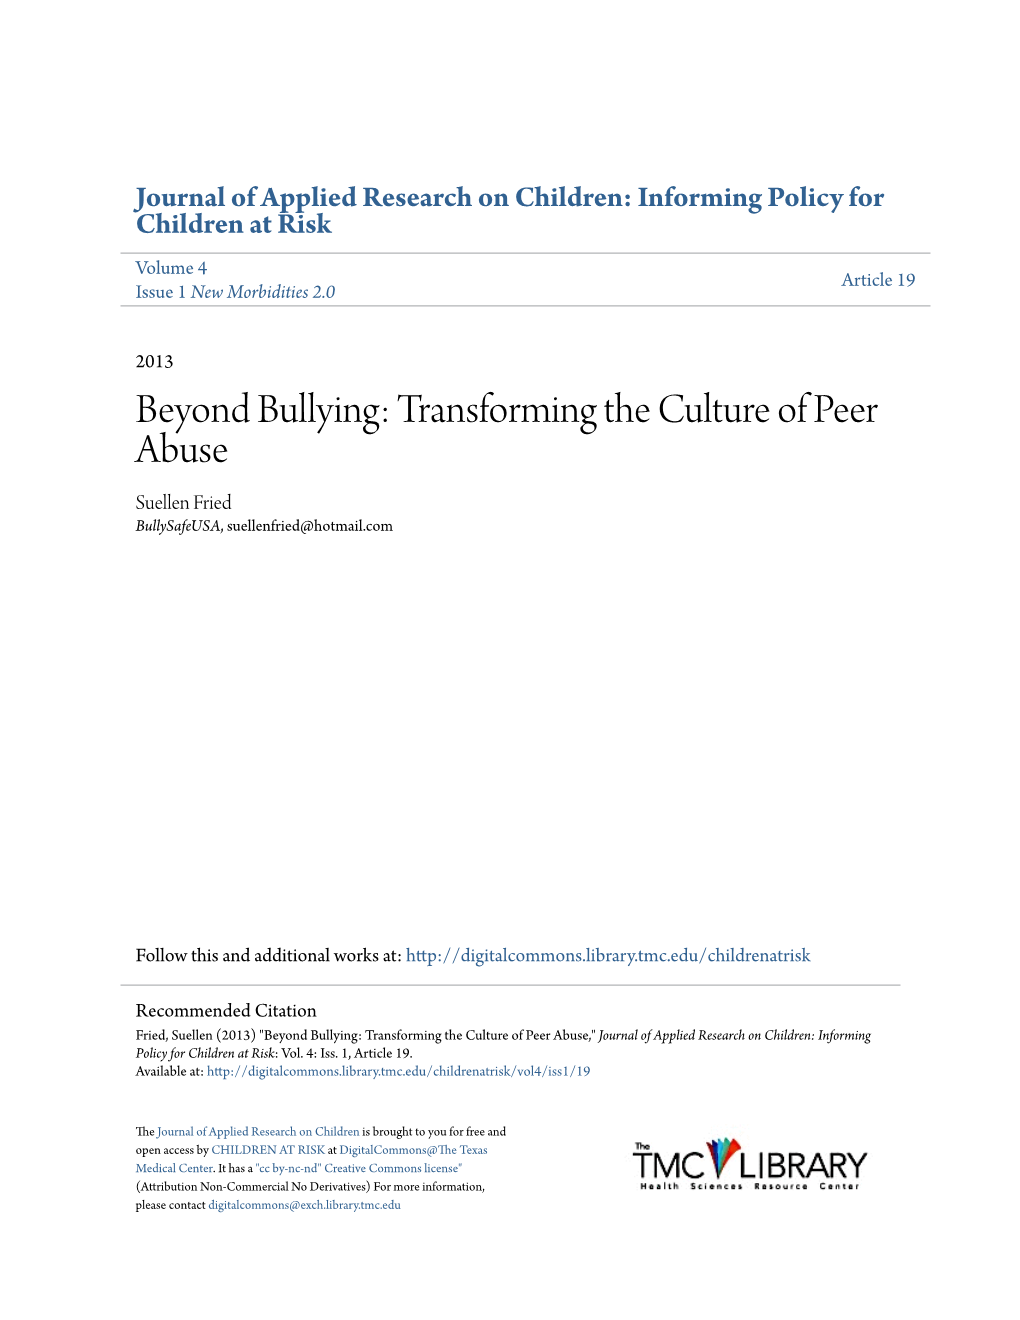 Beyond Bullying: Transforming the Culture of Peer Abuse Suellen Fried Bullysafeusa, Suellenfried@Hotmail.Com